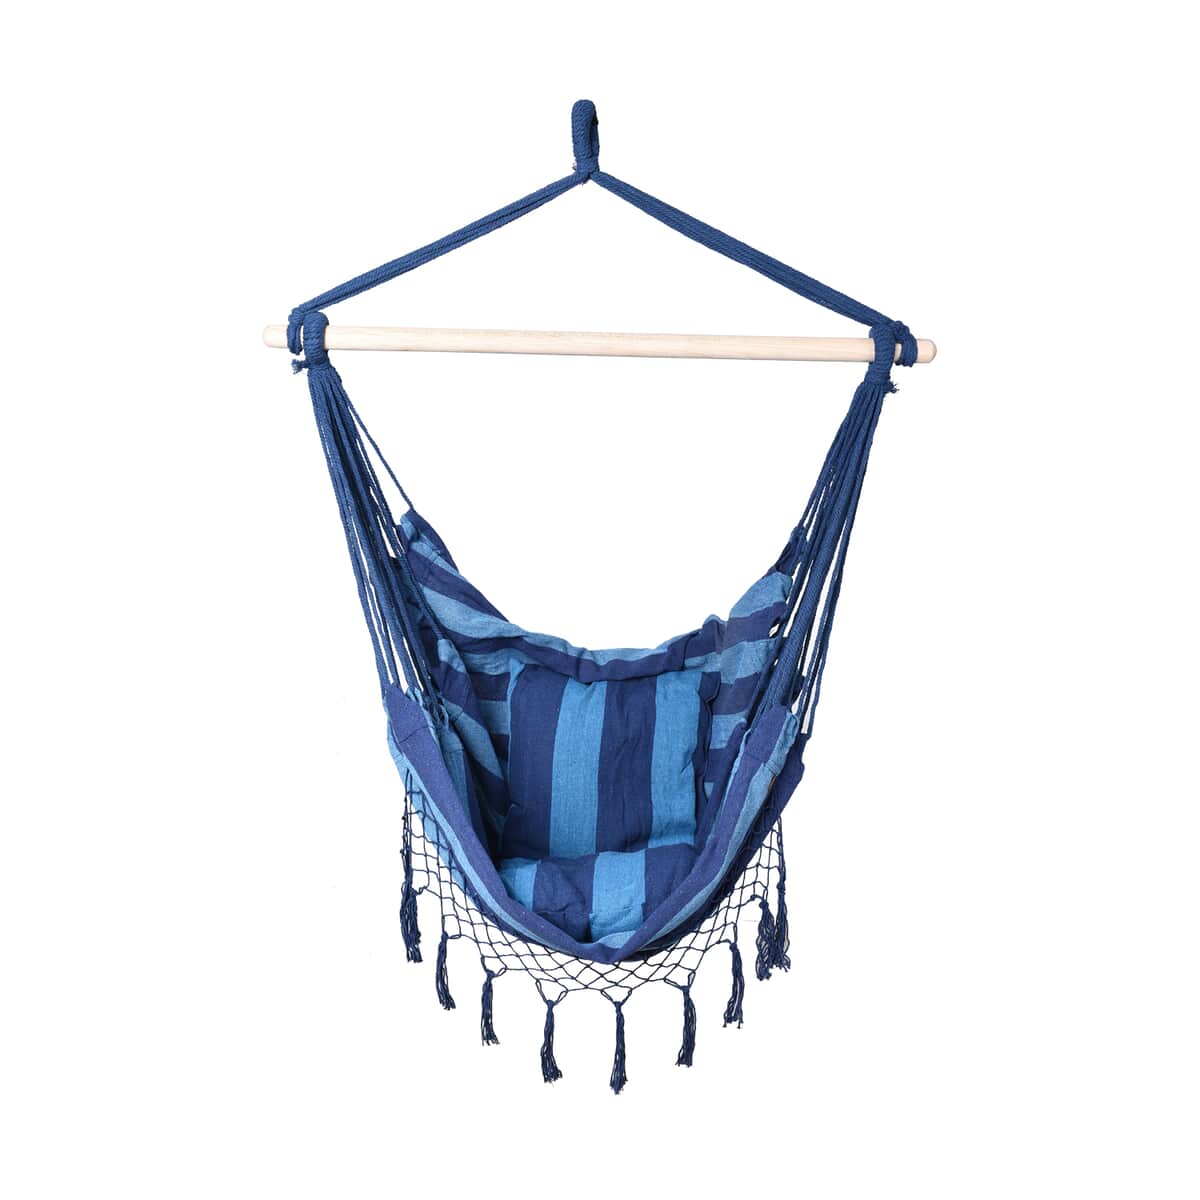 Blue Hanging Rope Hammock Chair with 2 Seat Cushions Included image number 0